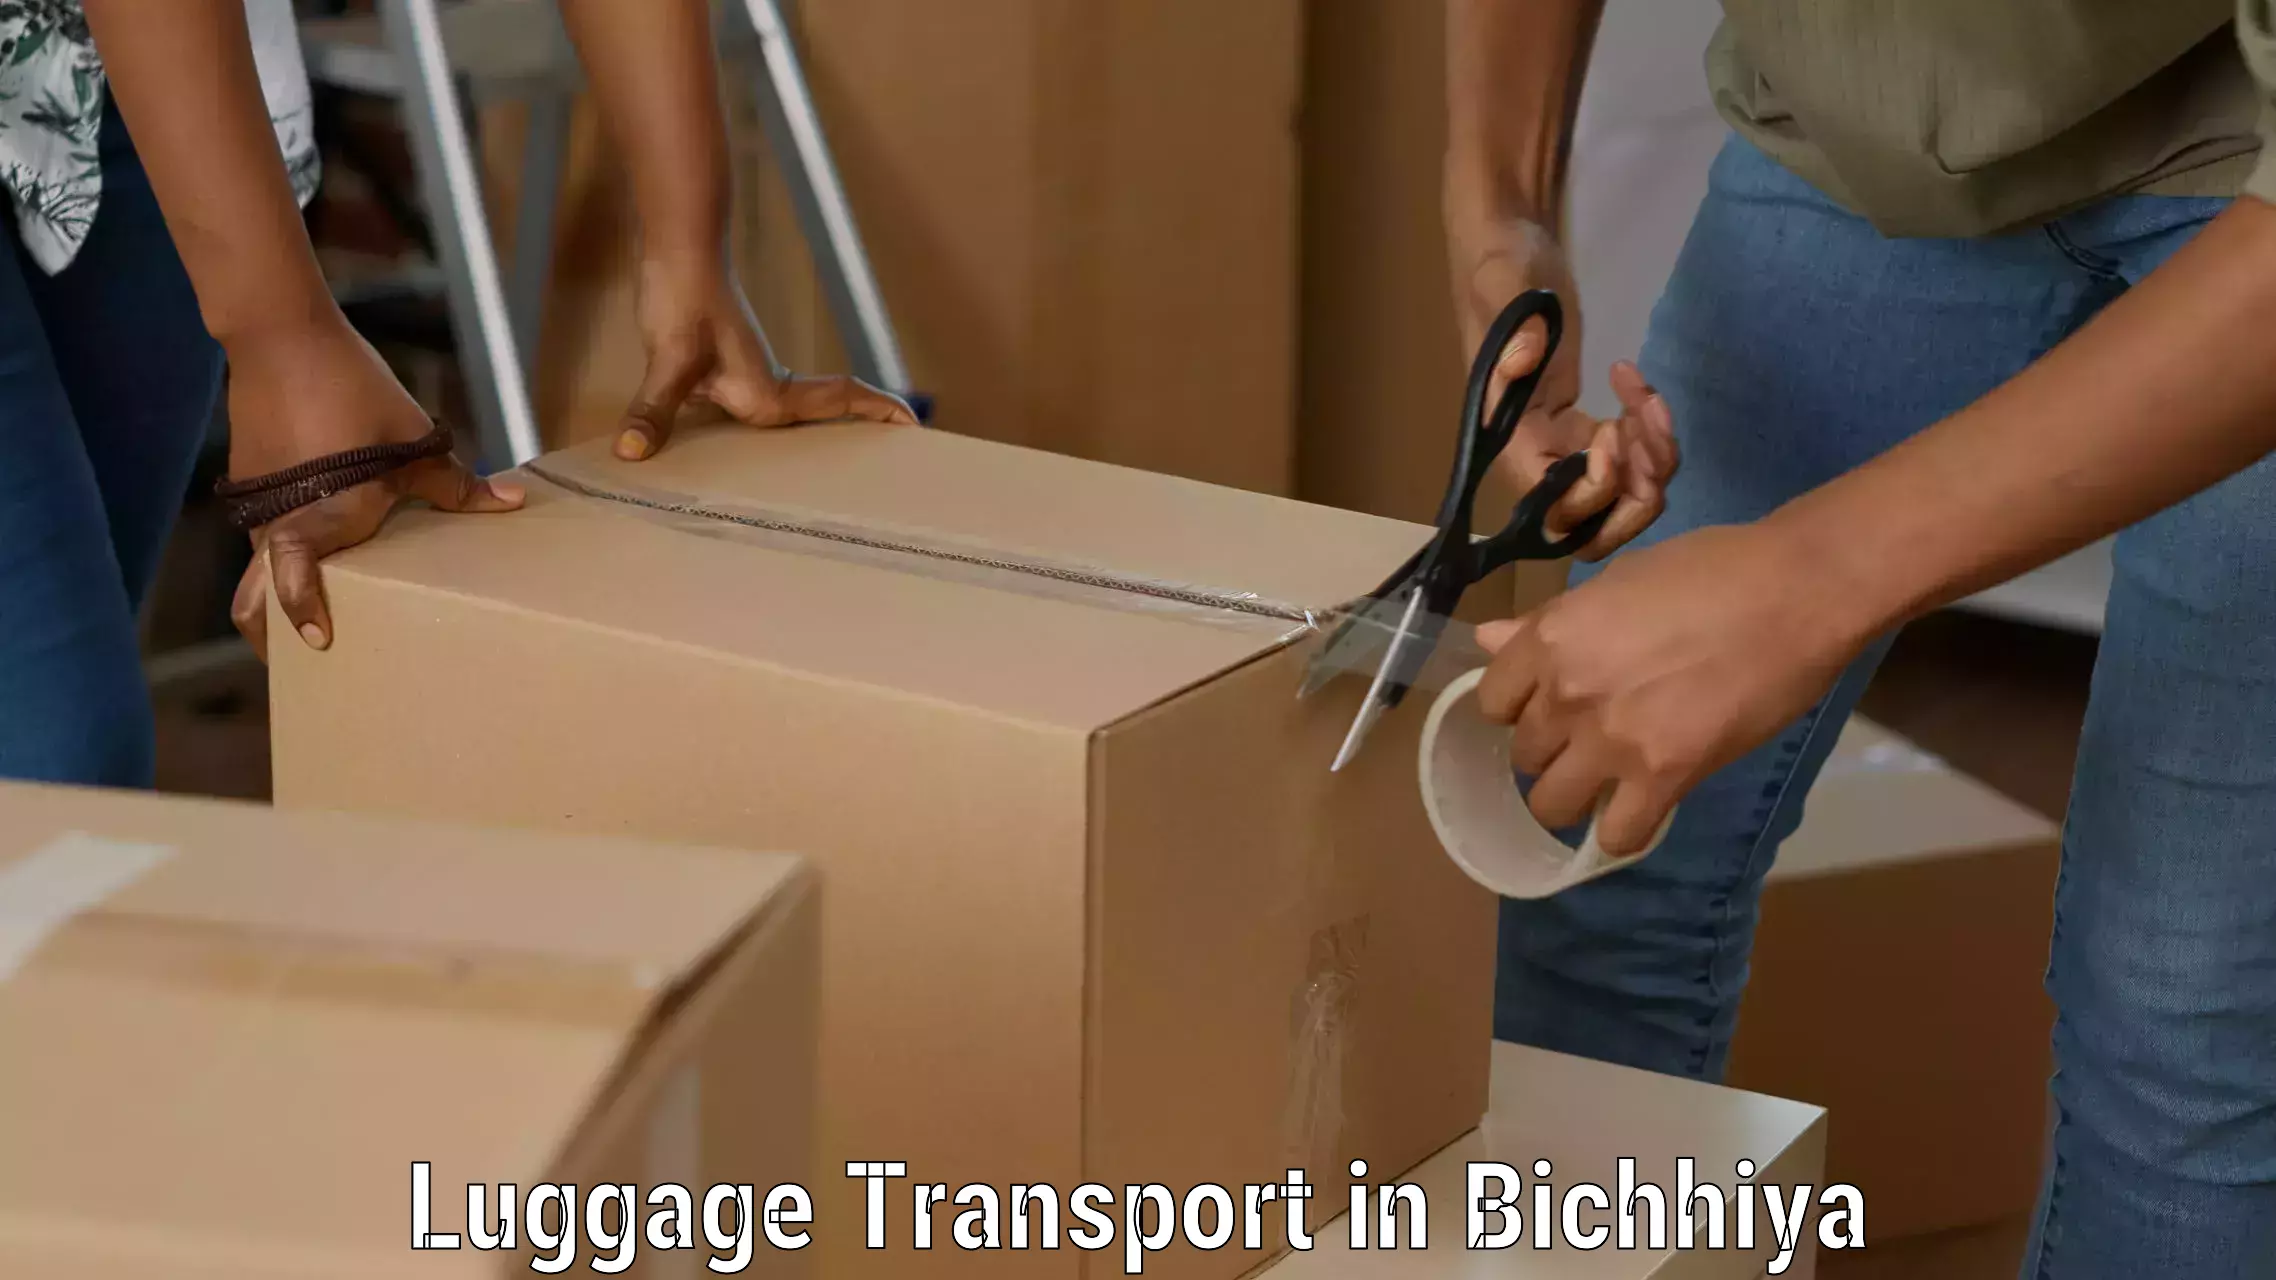 Luggage delivery app in Bichhiya